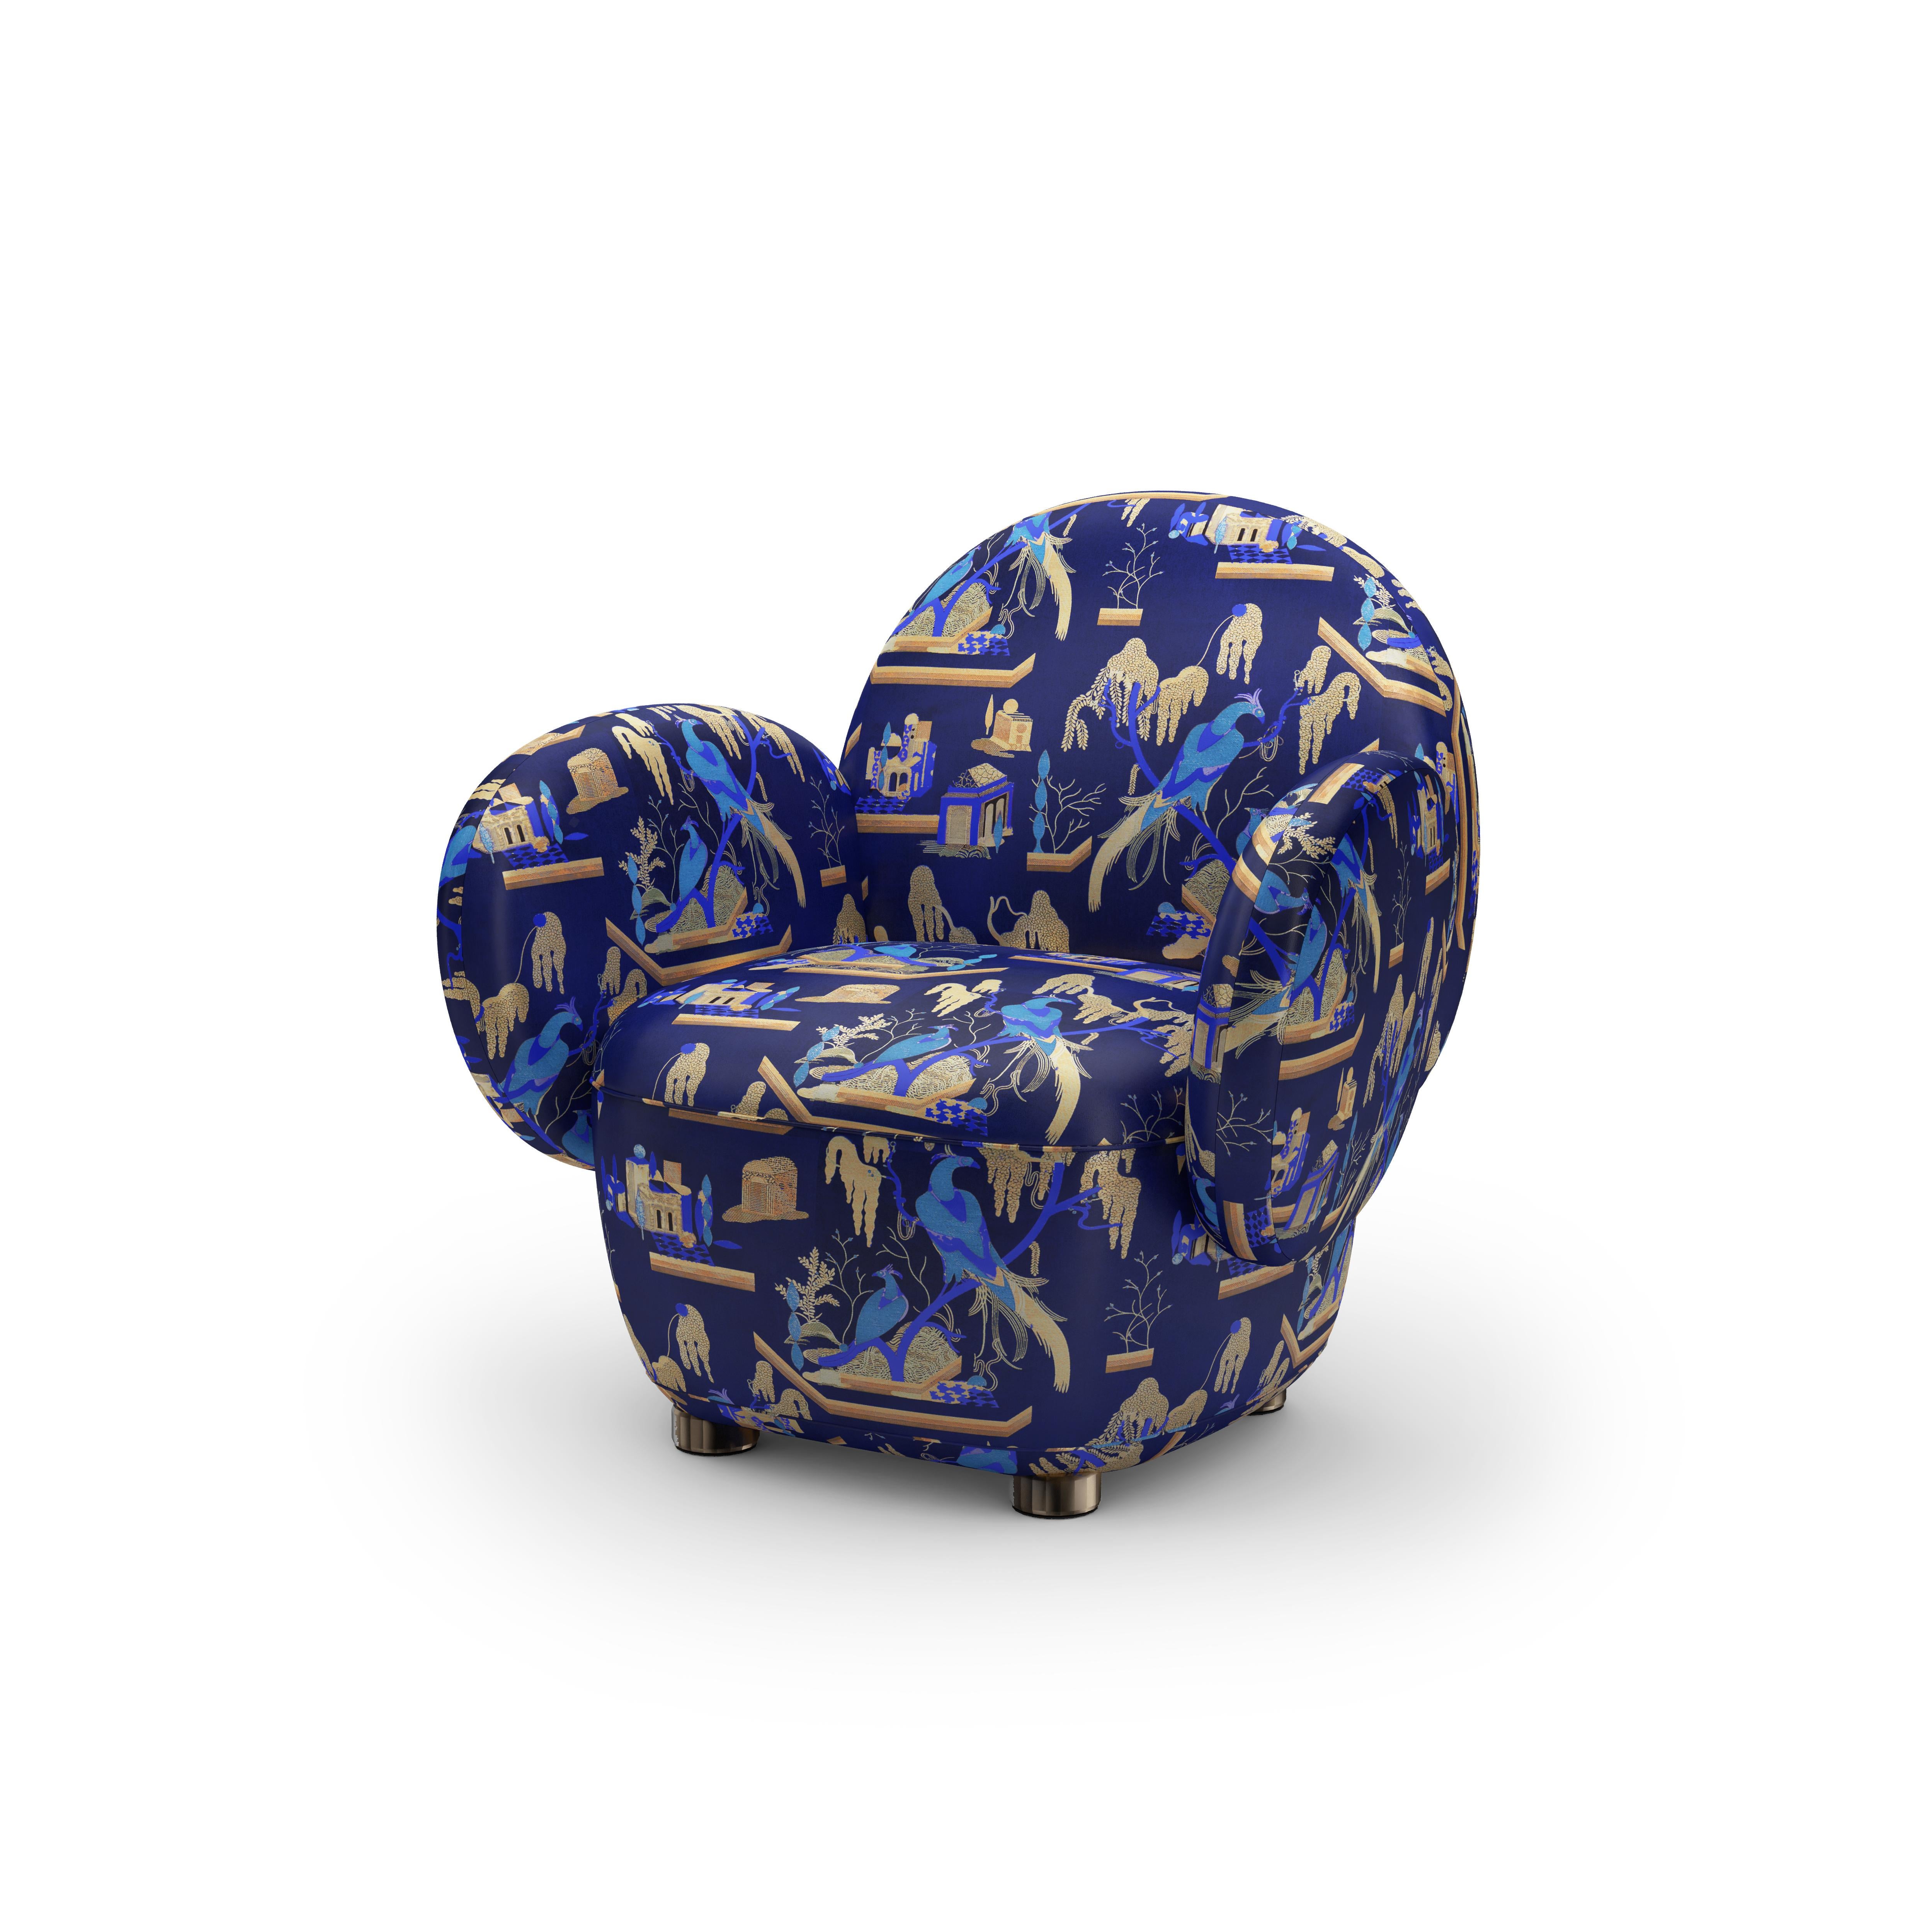 Dolce Armchair is an exquisite single seater sofa, which can be used on its own or with the Dolce Sofa. Its upholstered in the plush jacquard fabric, This Must Be The Place by Dedar Milano. Ideal for playful lazing! Designed by Matteo Cibic.